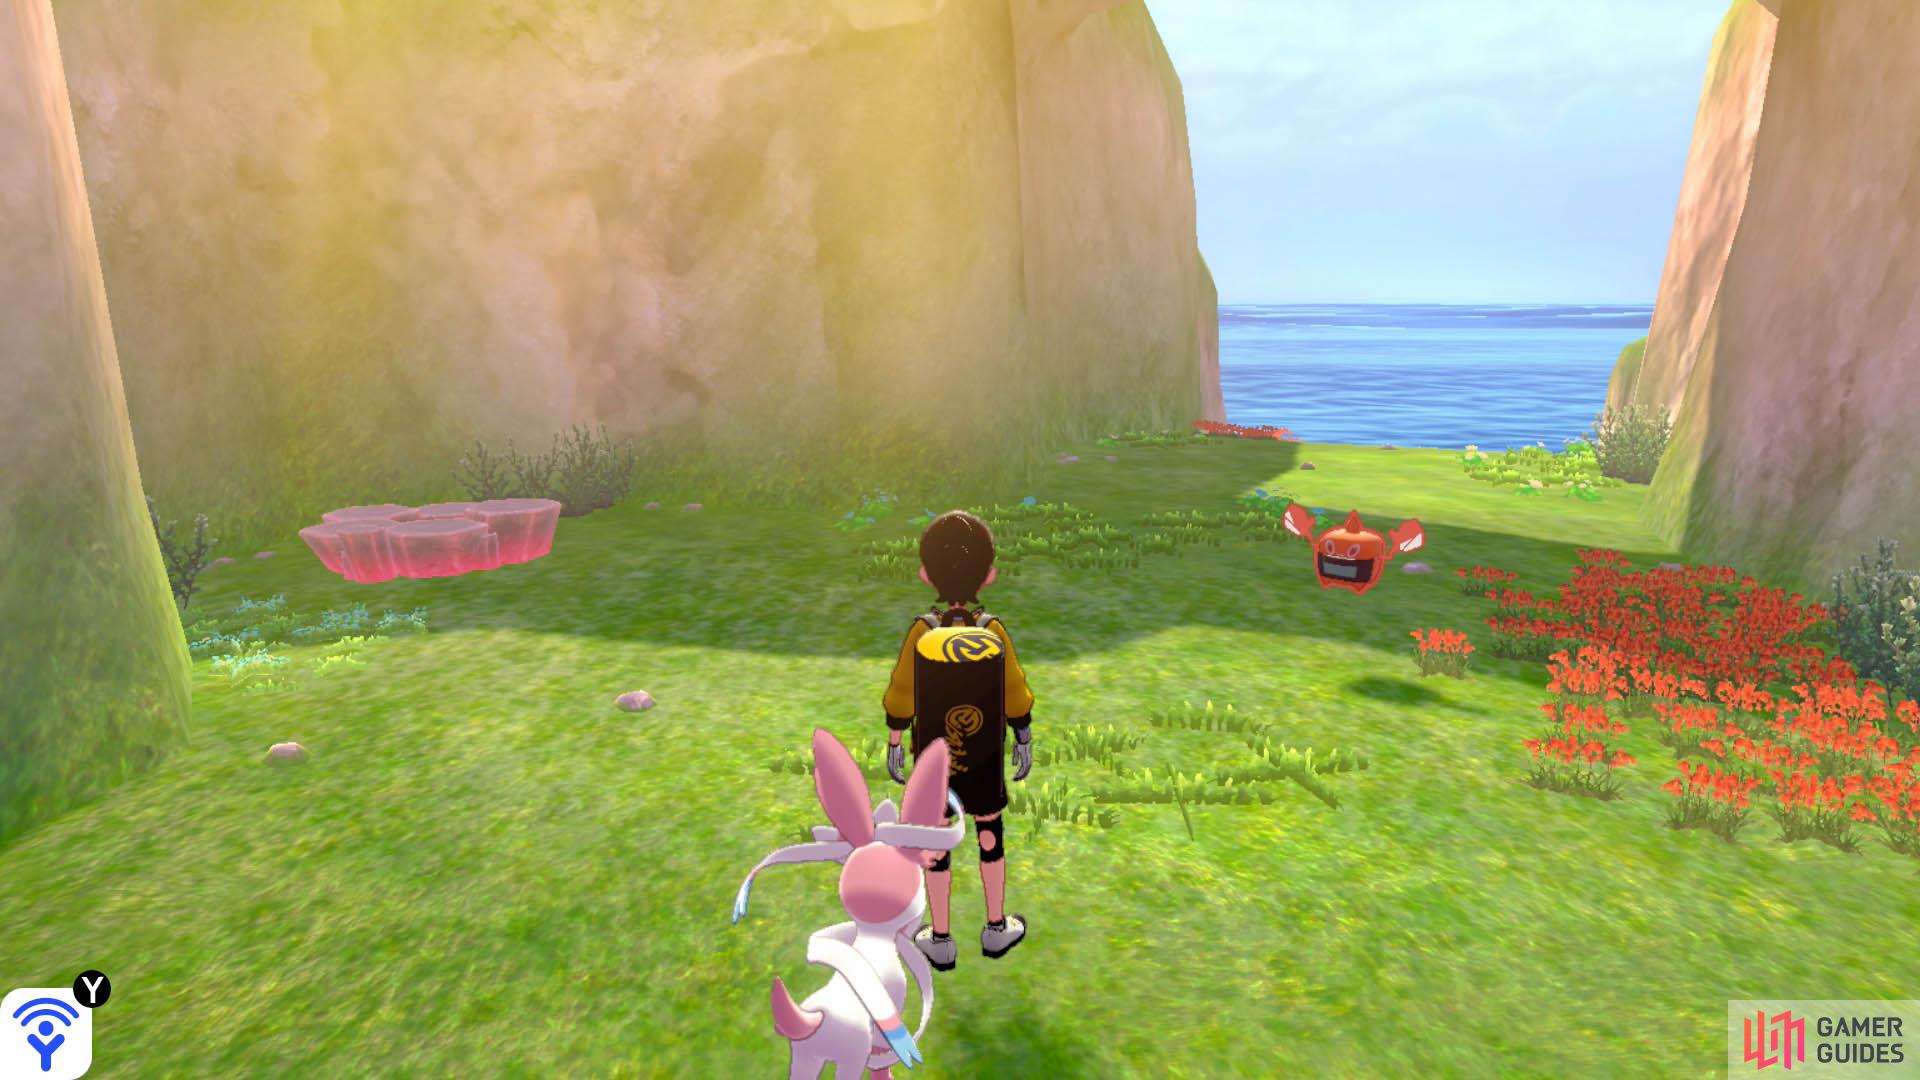 From Den F, swim forward with the mainland on your right. Head towards the island with an archway. This den is located near the centre of the island, next to a roaming Rotom.